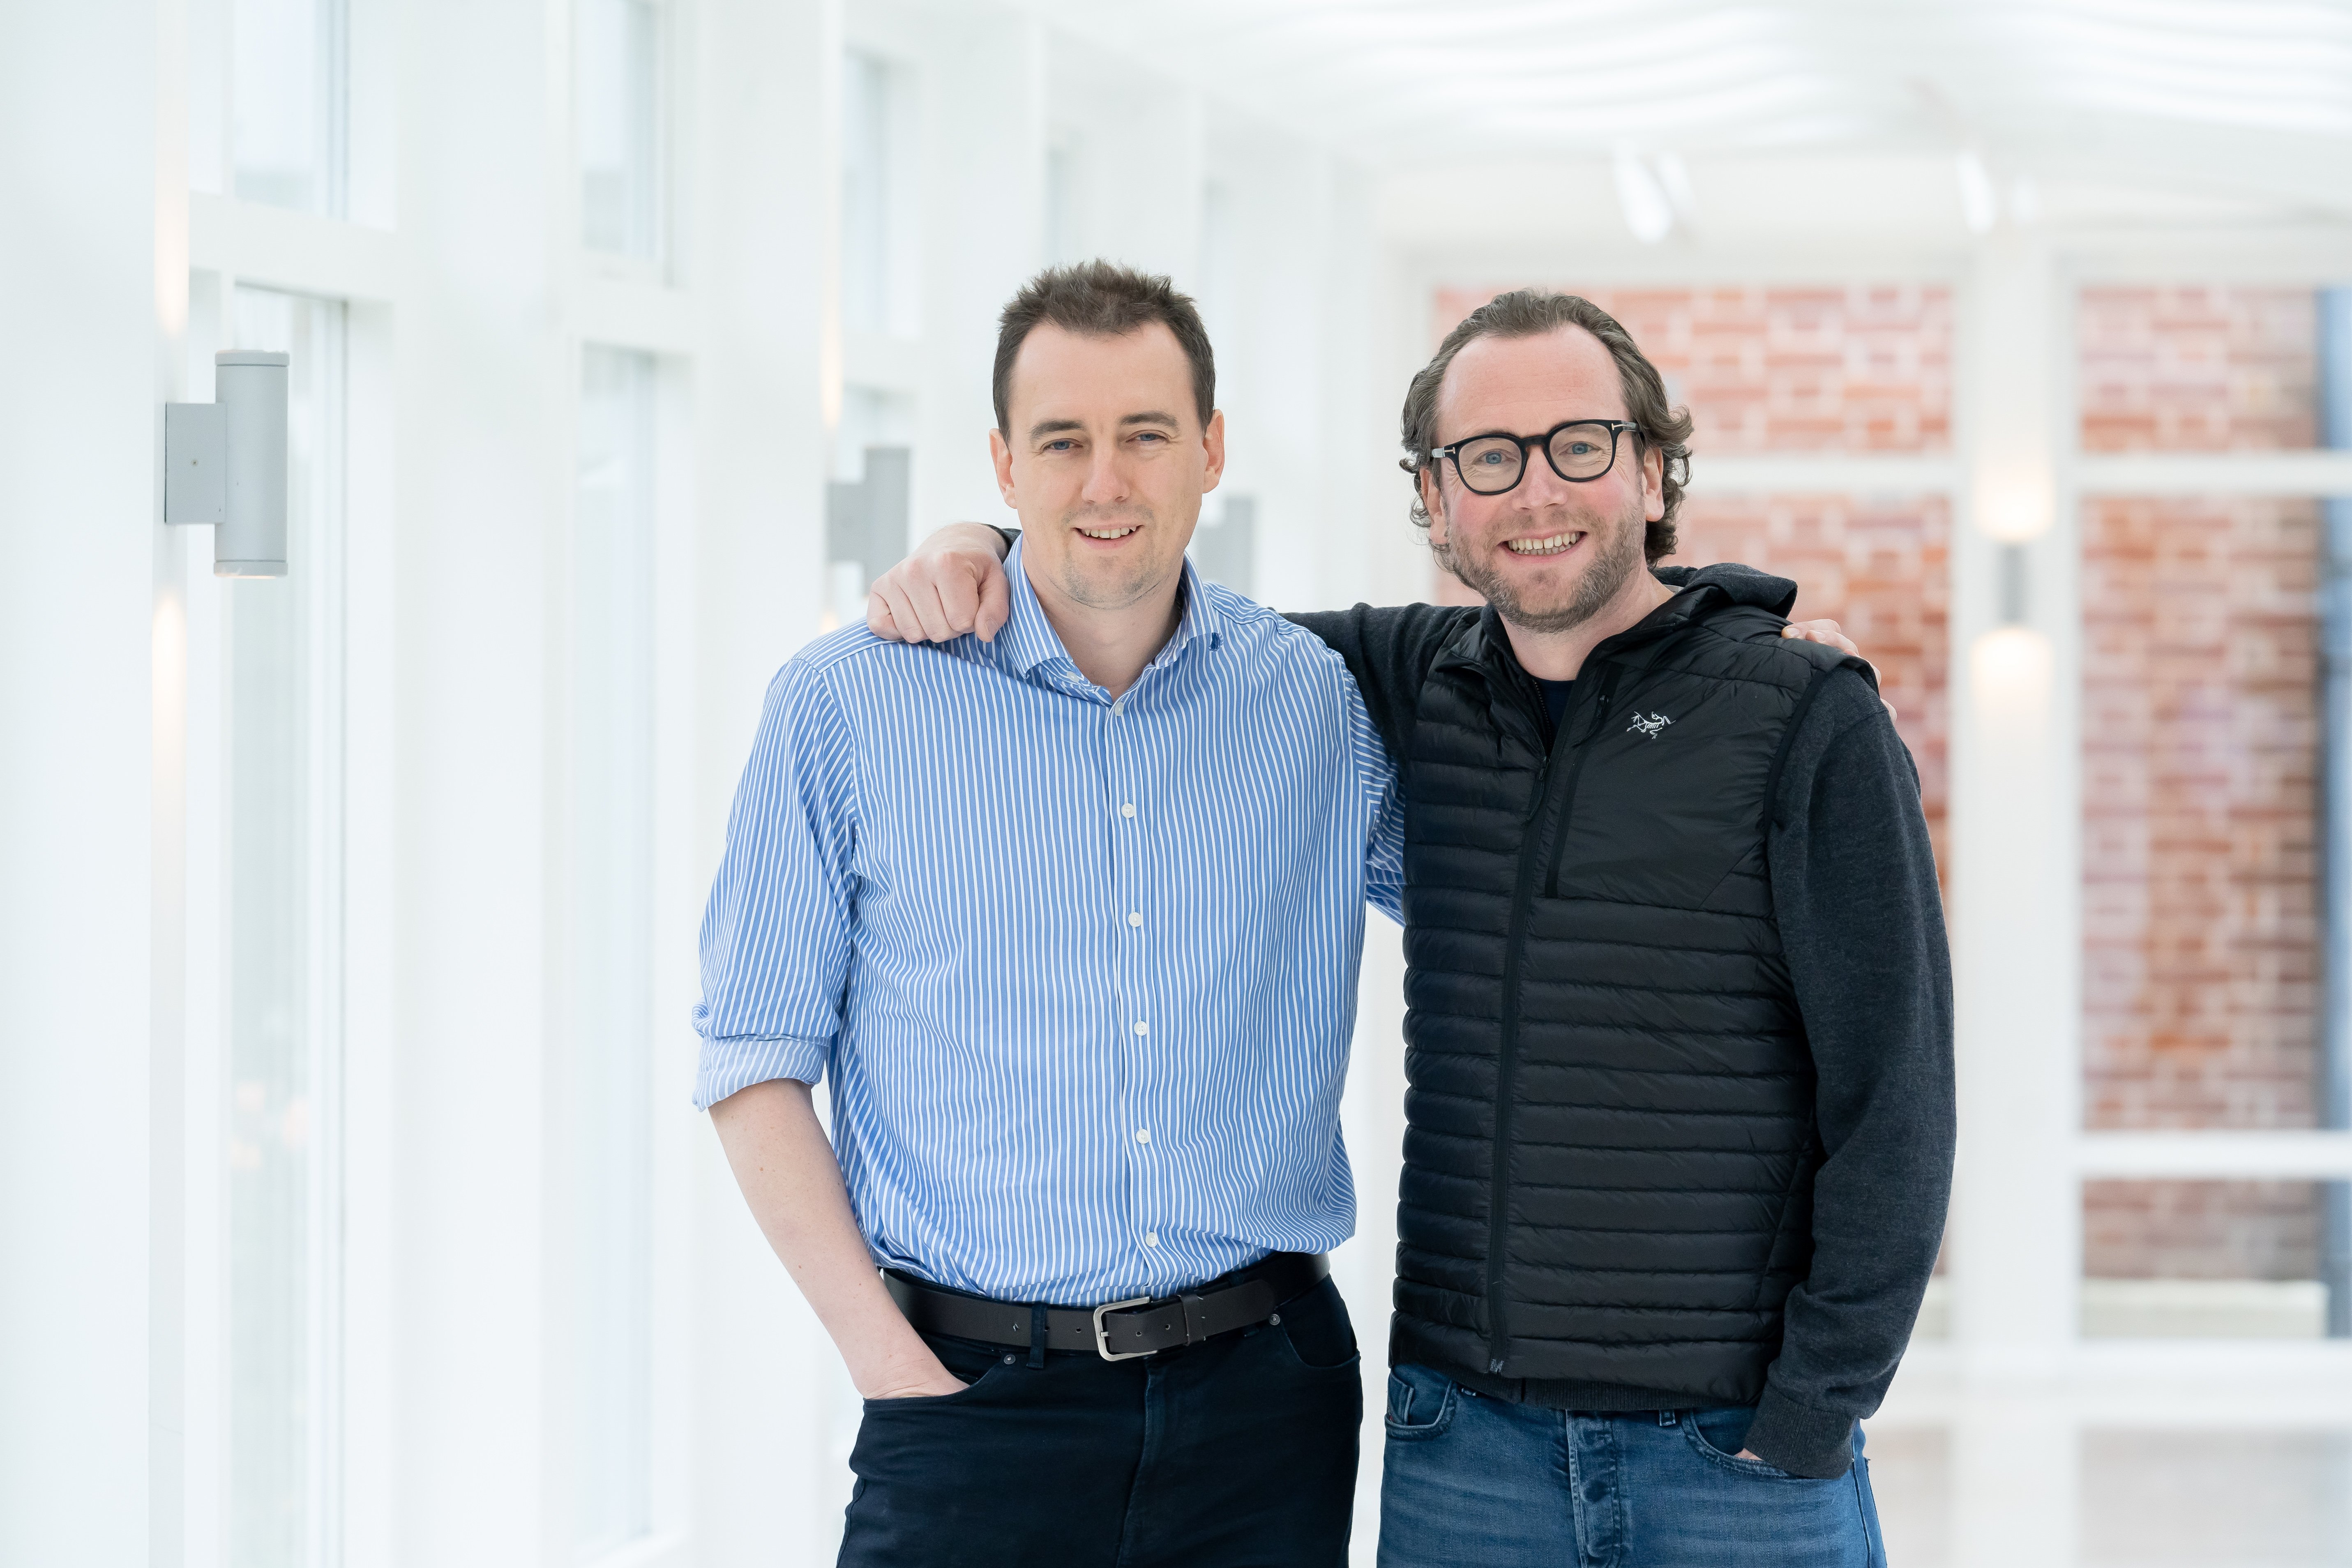 Matillion was founded by CTO Ed Thompson (left) and CEO Matthew Scullion.